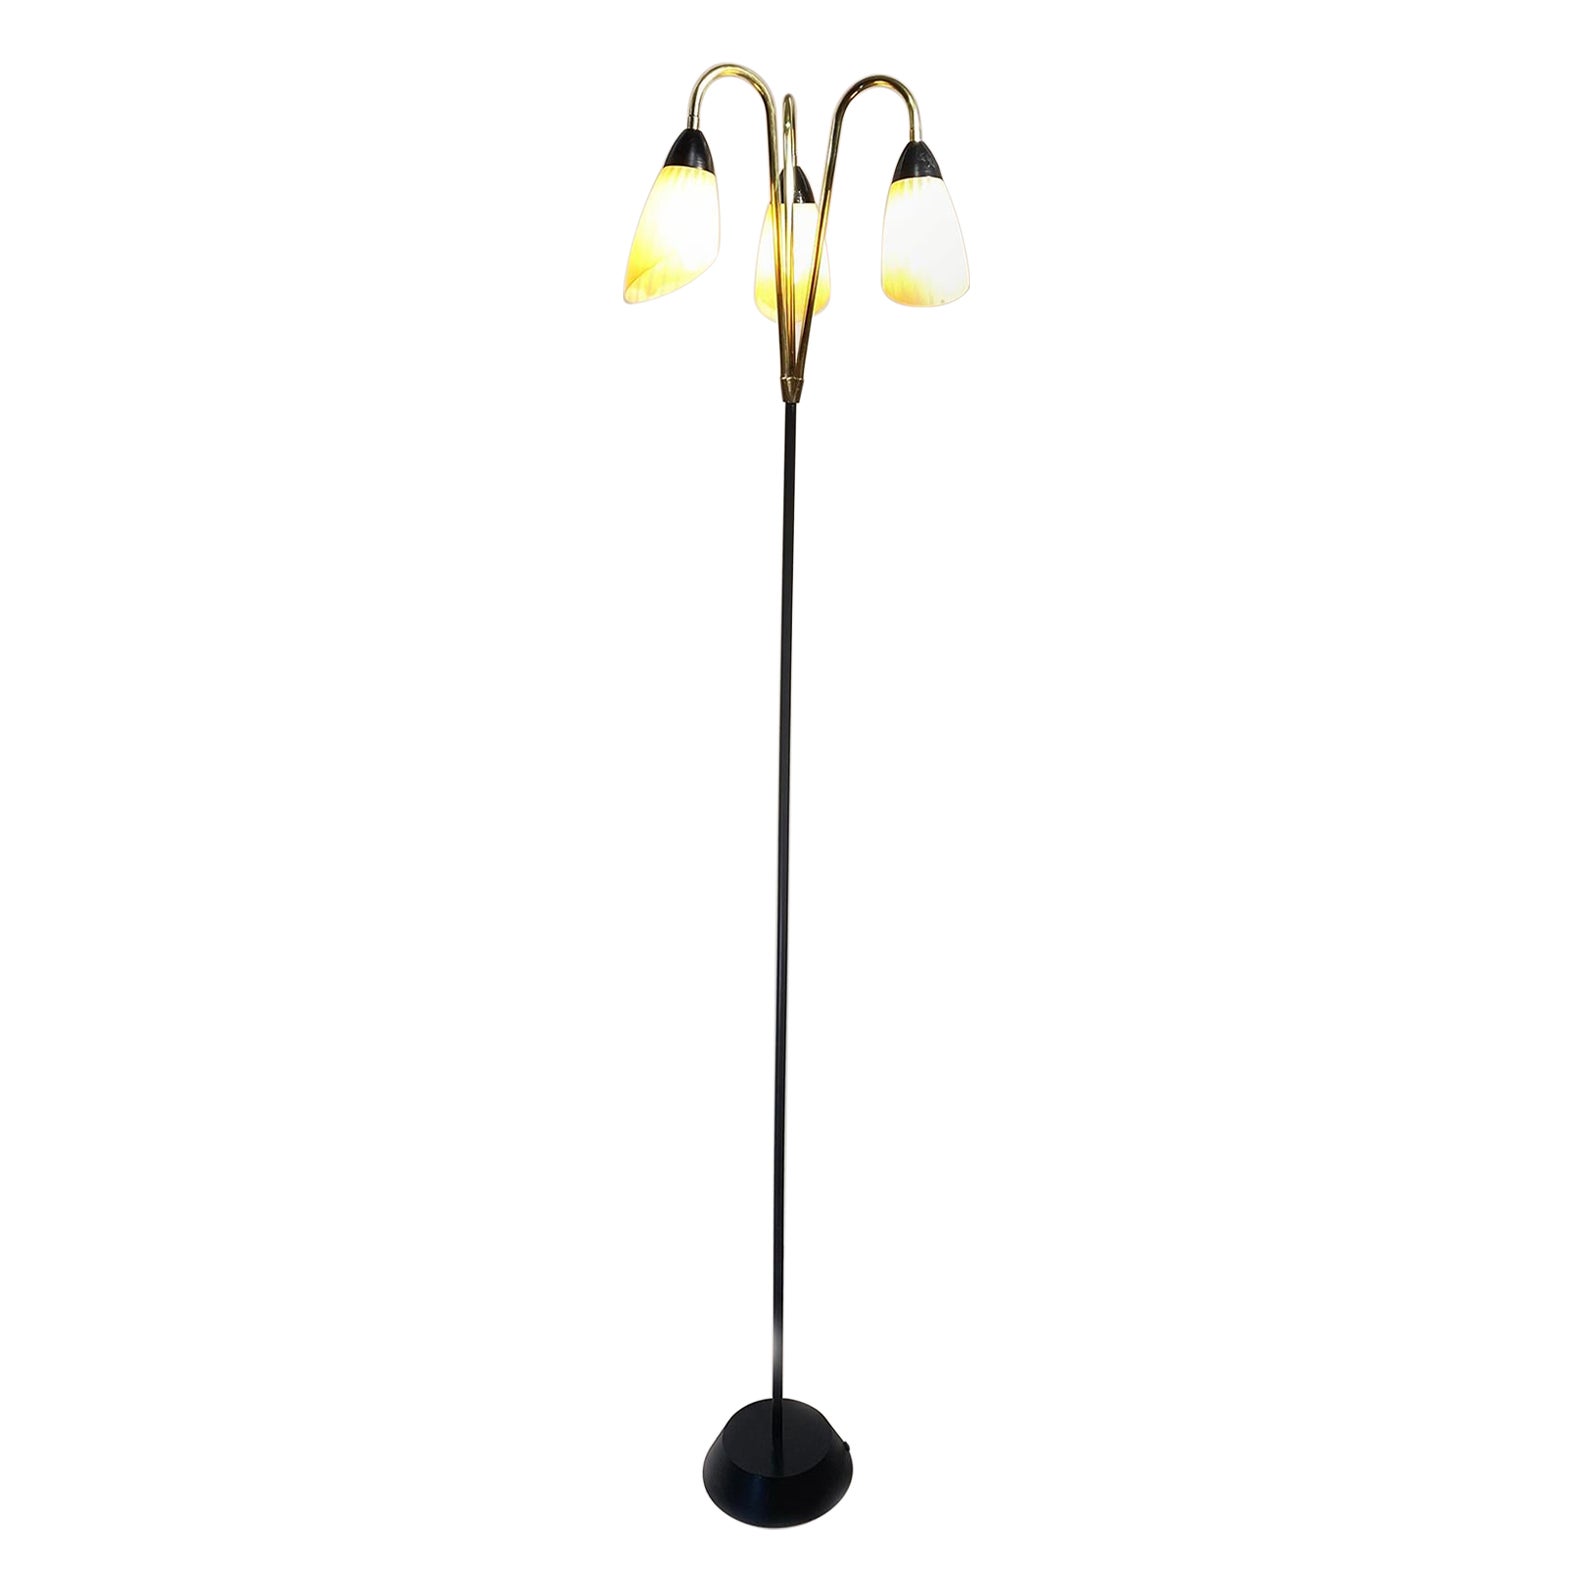 French Brass and Black Metal Floor Lamp with 3 Glass Lights, 1950s For Sale